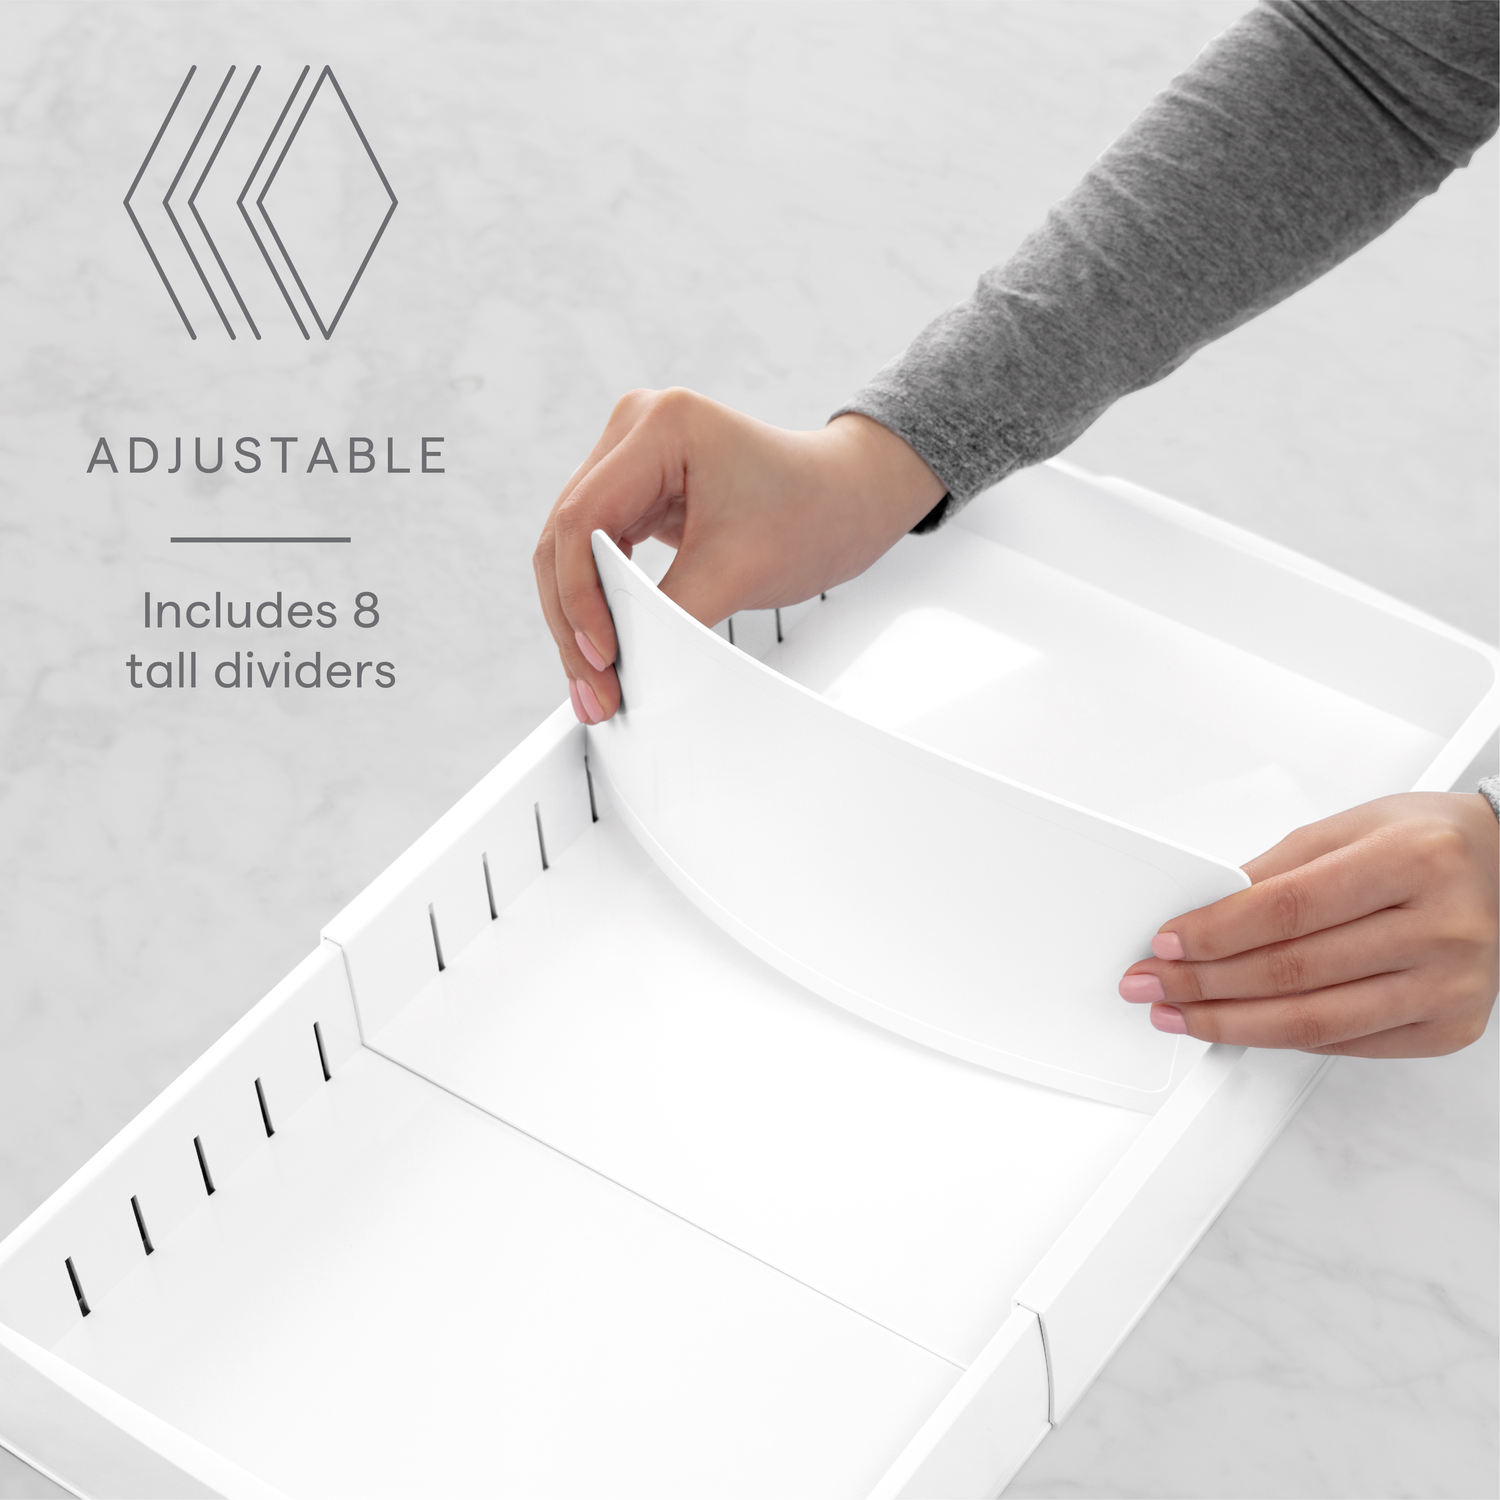 YouCopia StoraLid Plastic Container Lid Organizer Review - Kitchen